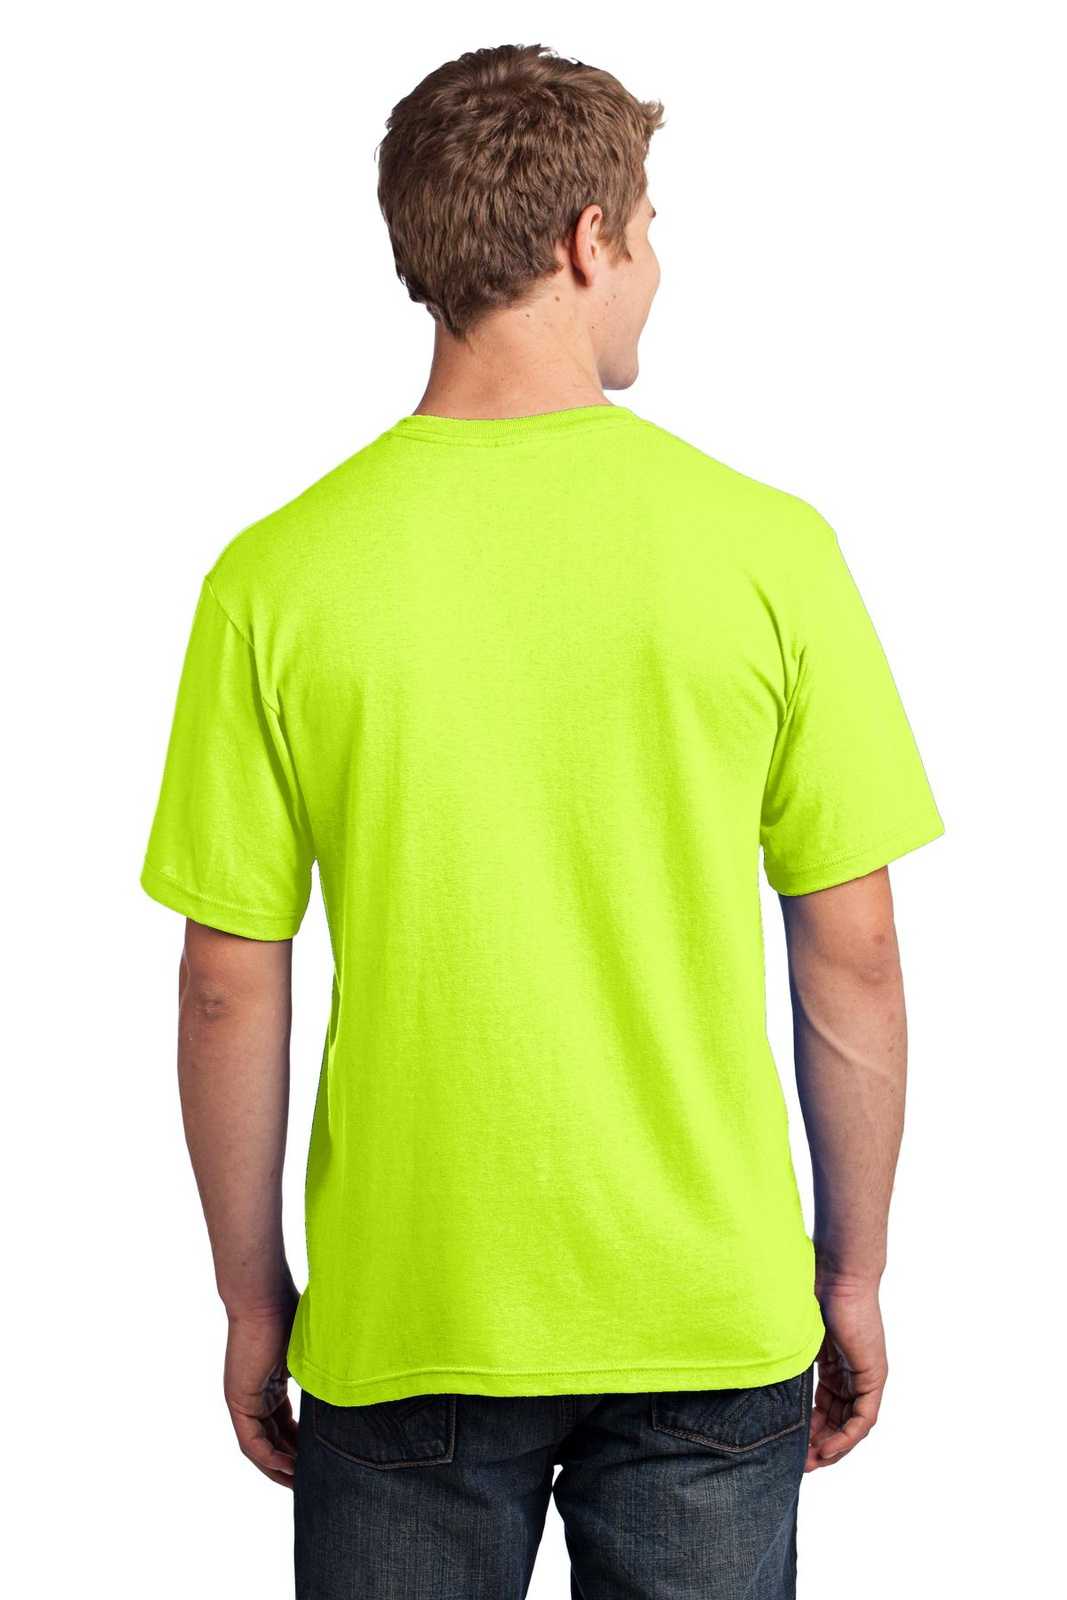 Port &amp; Company USA100 All-American Tee - Safety Green - HIT a Double - 2